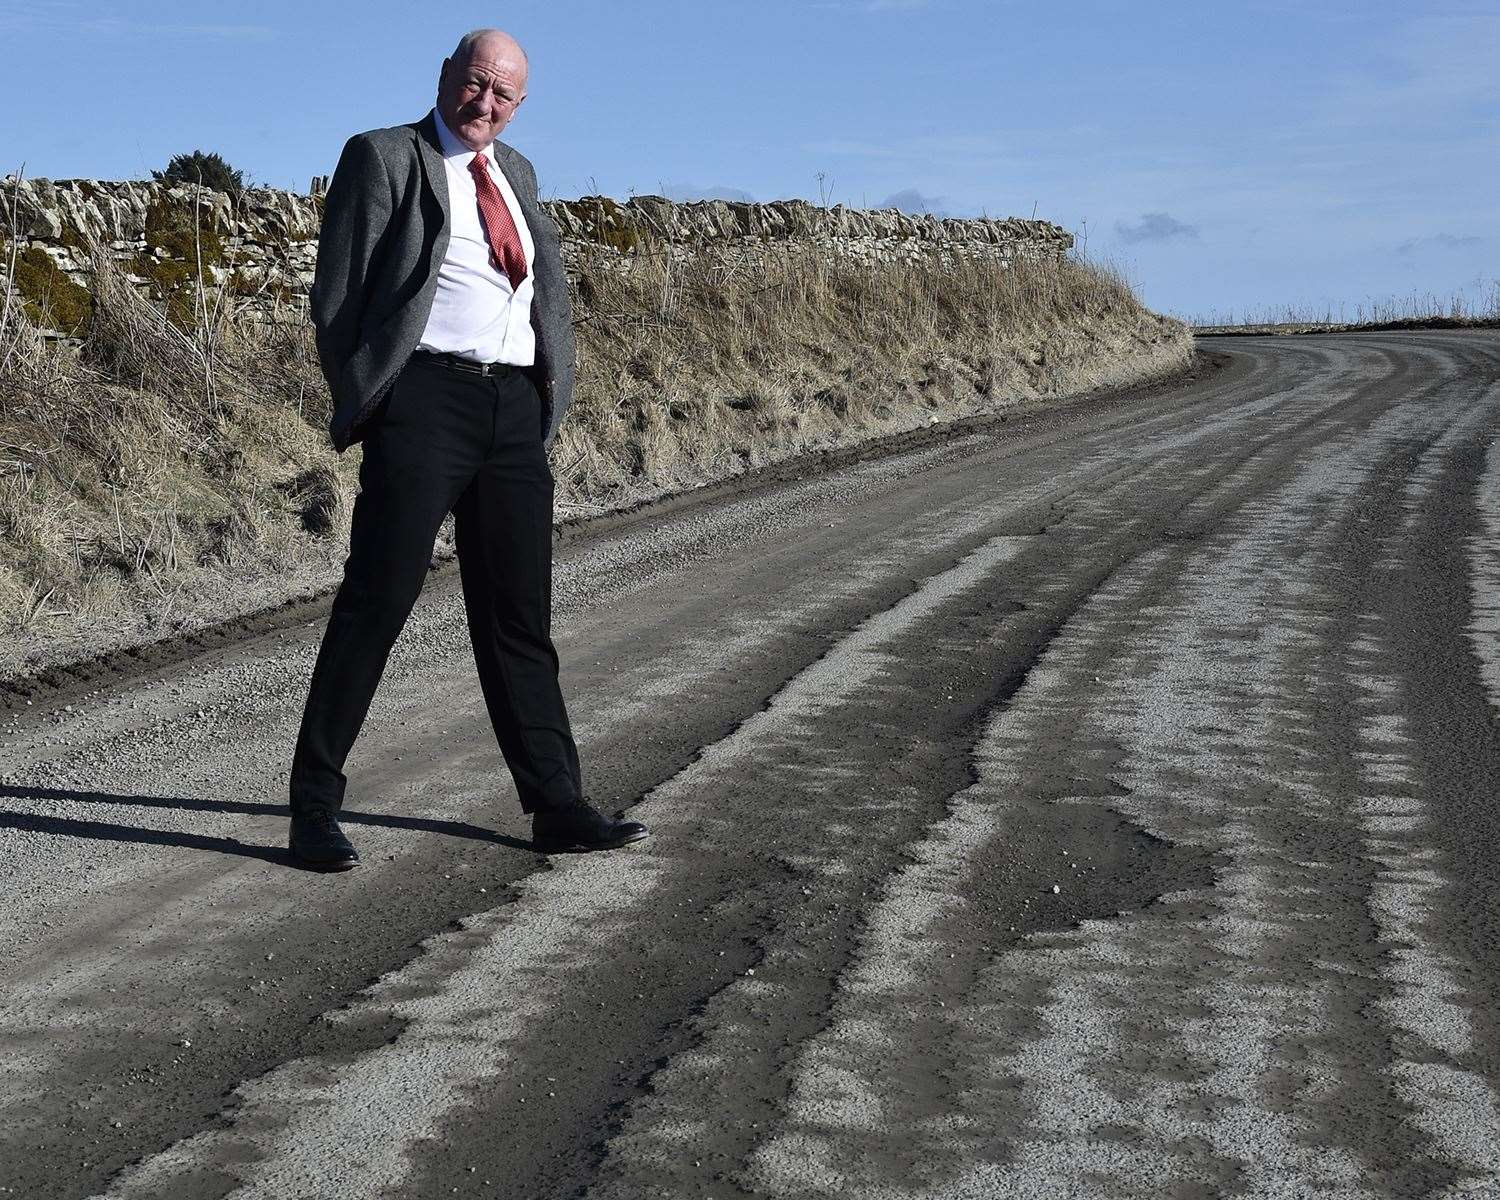 Iain Gregory has called on the Scottish Government to help fund repairs.